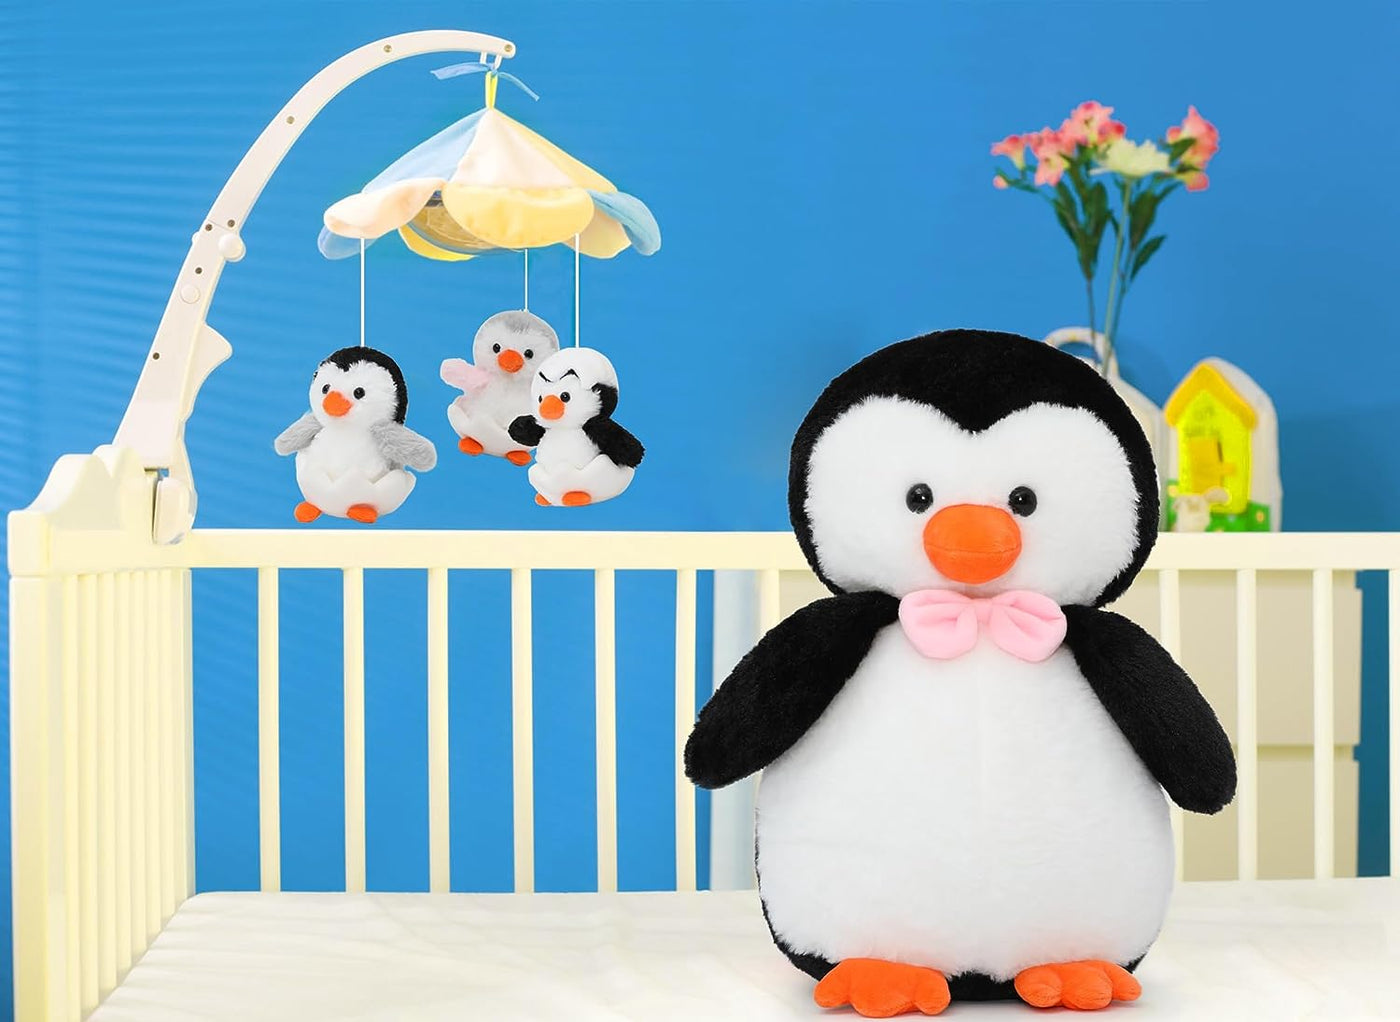 MorisMos Penguin Stuffed Animal with Baby Inside, Large Mommy Stuffed Penguin Plush Toy and 3 Baby Plush Penguins-Hanging Plush Penguin Ornaments for Keychain,Bag,Crib, Penguin Gifts for Girl Boy Kid